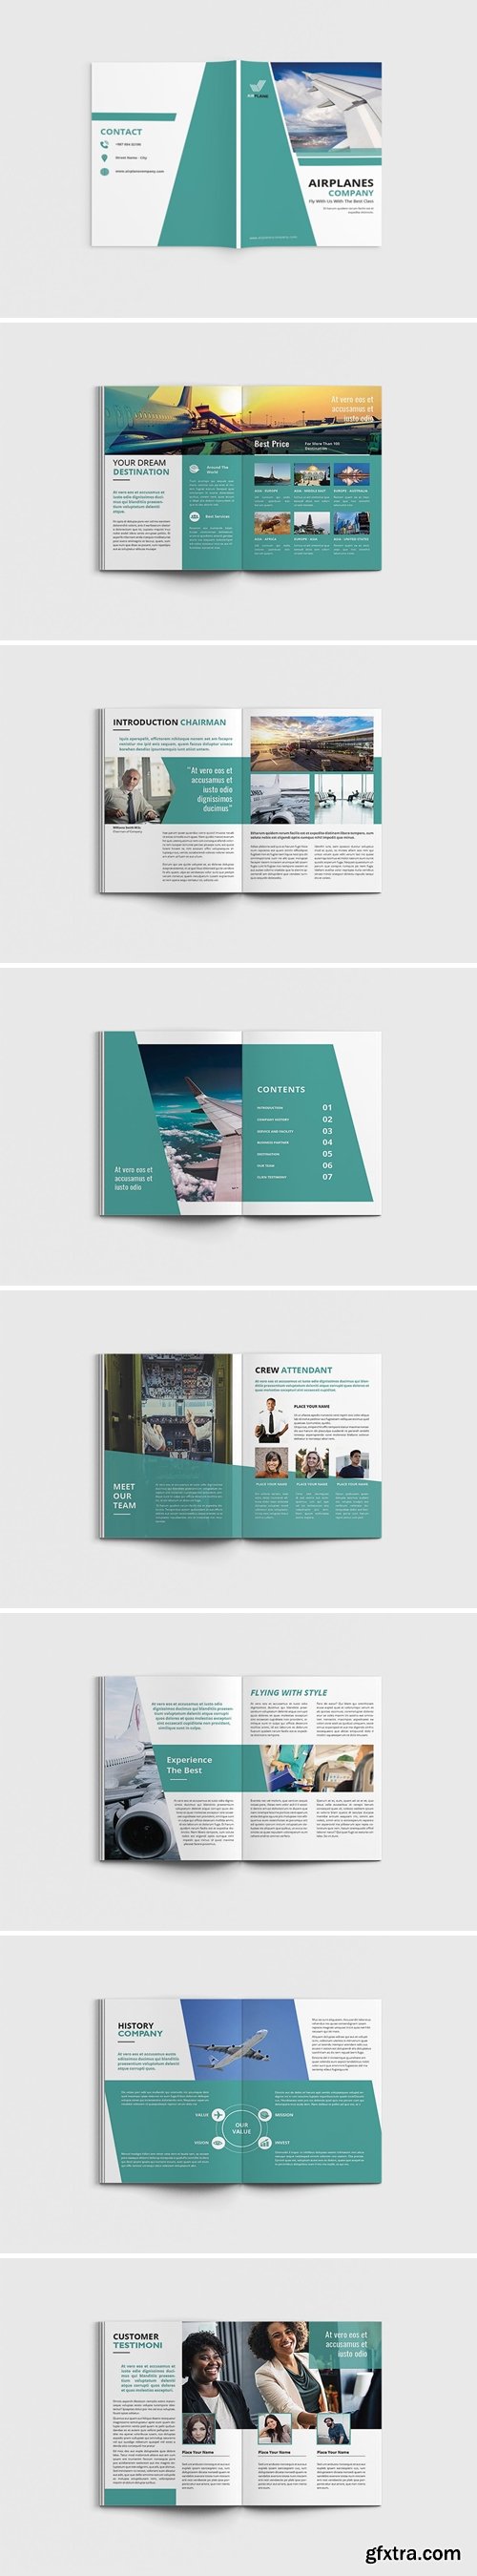 Jetcore - A4 Airlines Brochure Template